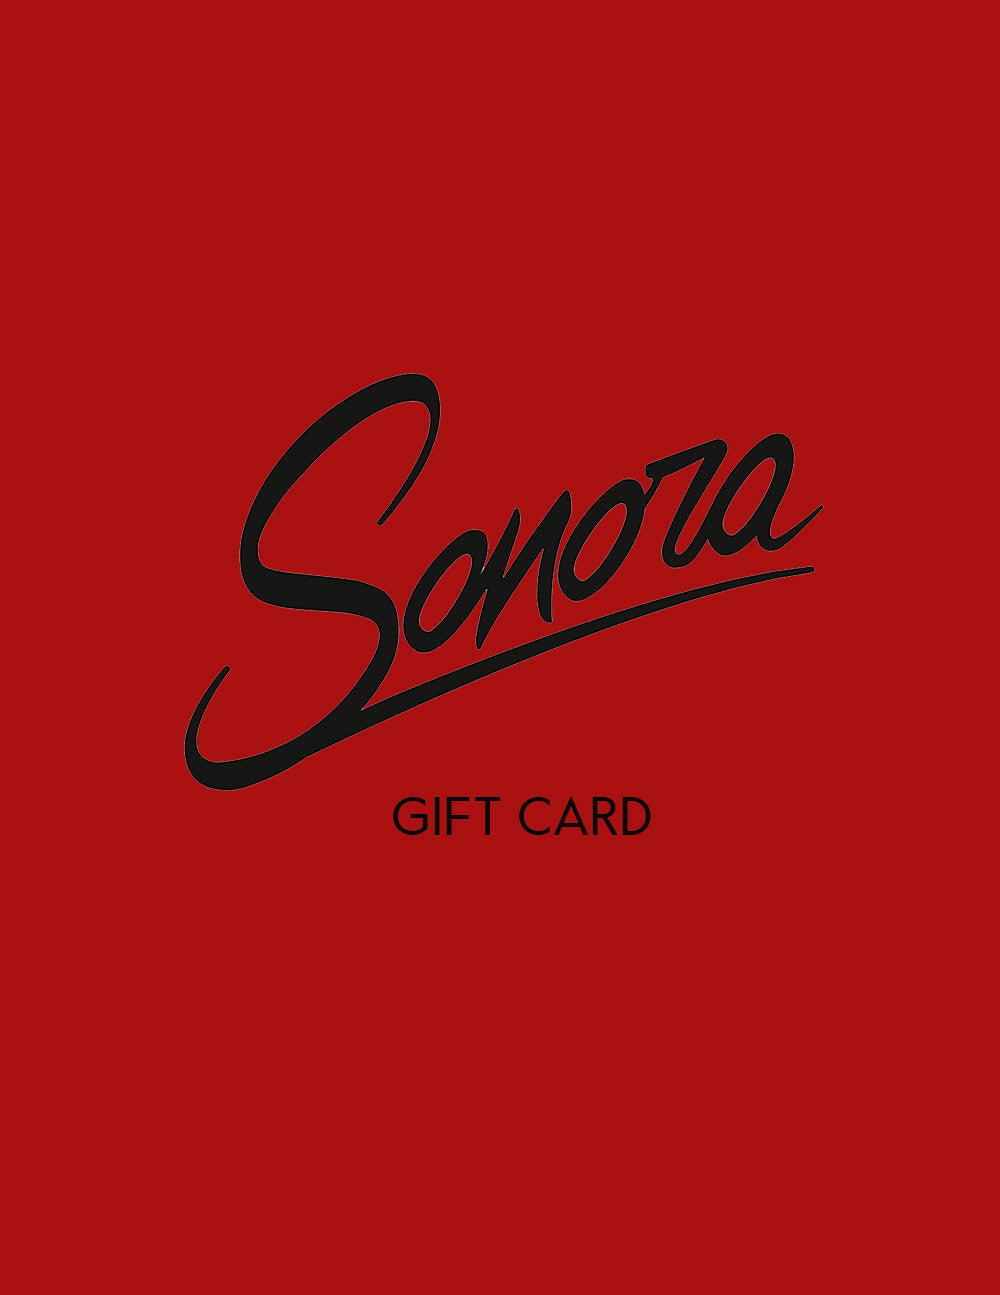 Sonora Gift Card